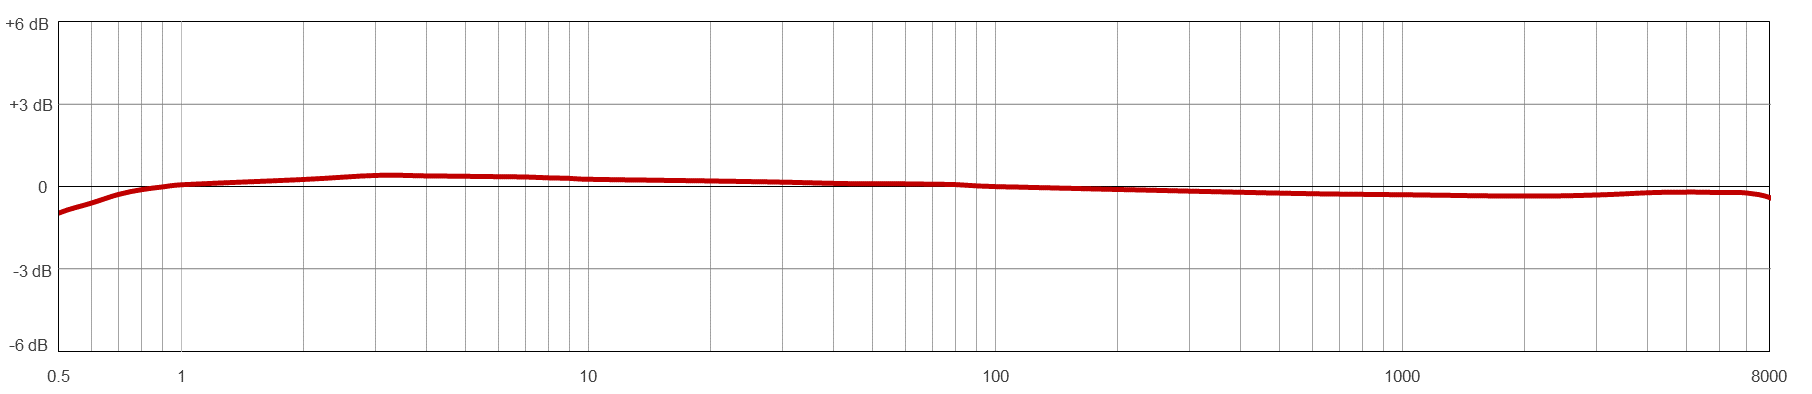 A line graph showing the frequency resopnse of a CTC AC298 condition monitoring sensor.